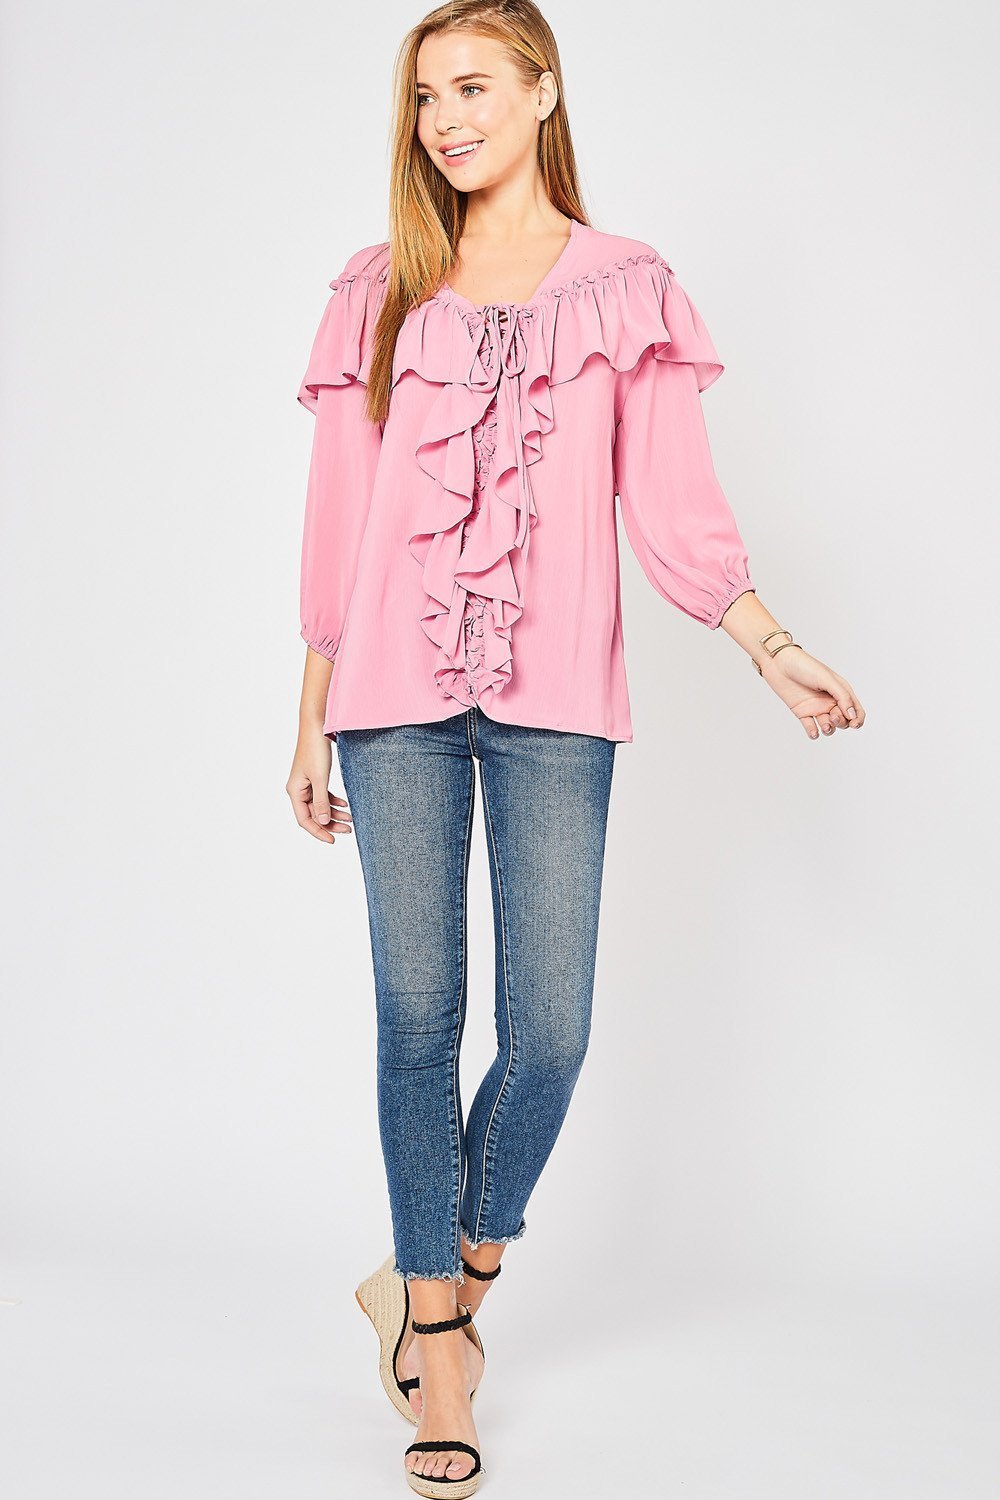 Romantic Ruffle Lace-Up Blouse by Entro